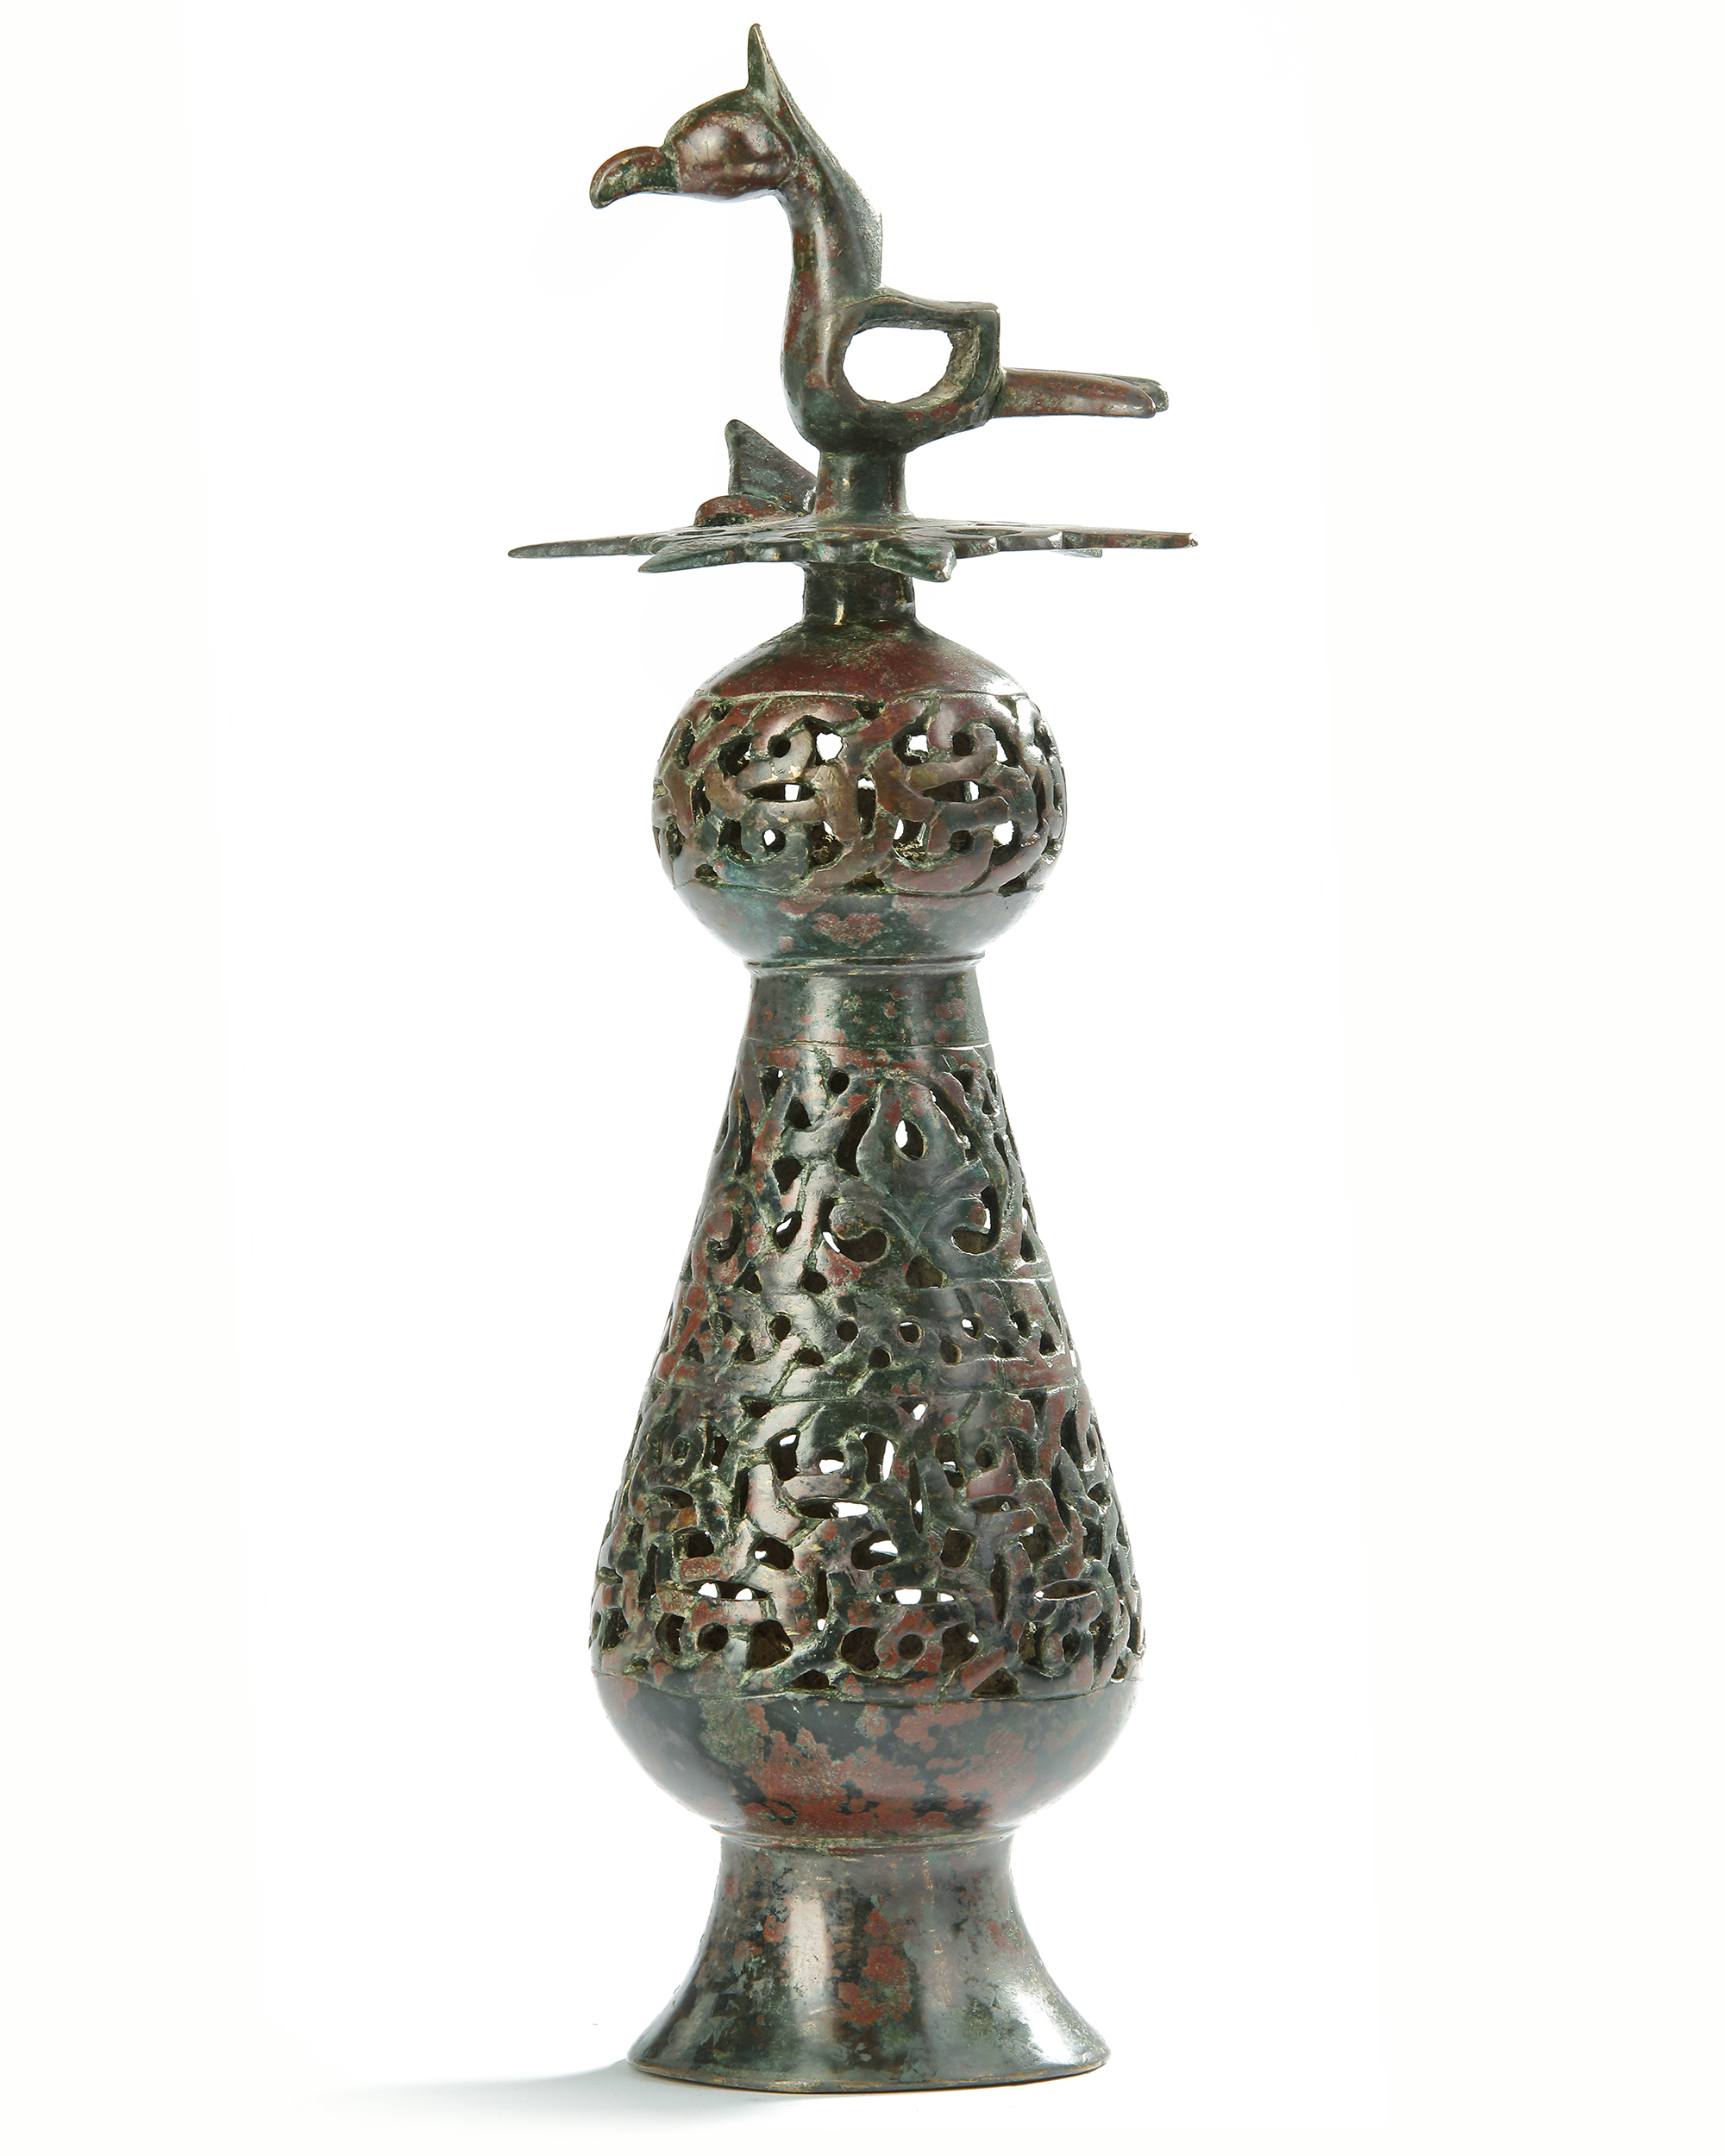 A KHORASAN OPENWORK BRONZE FINIAL, PERSIA, 12TH-13TH CENTURY - Image 2 of 6